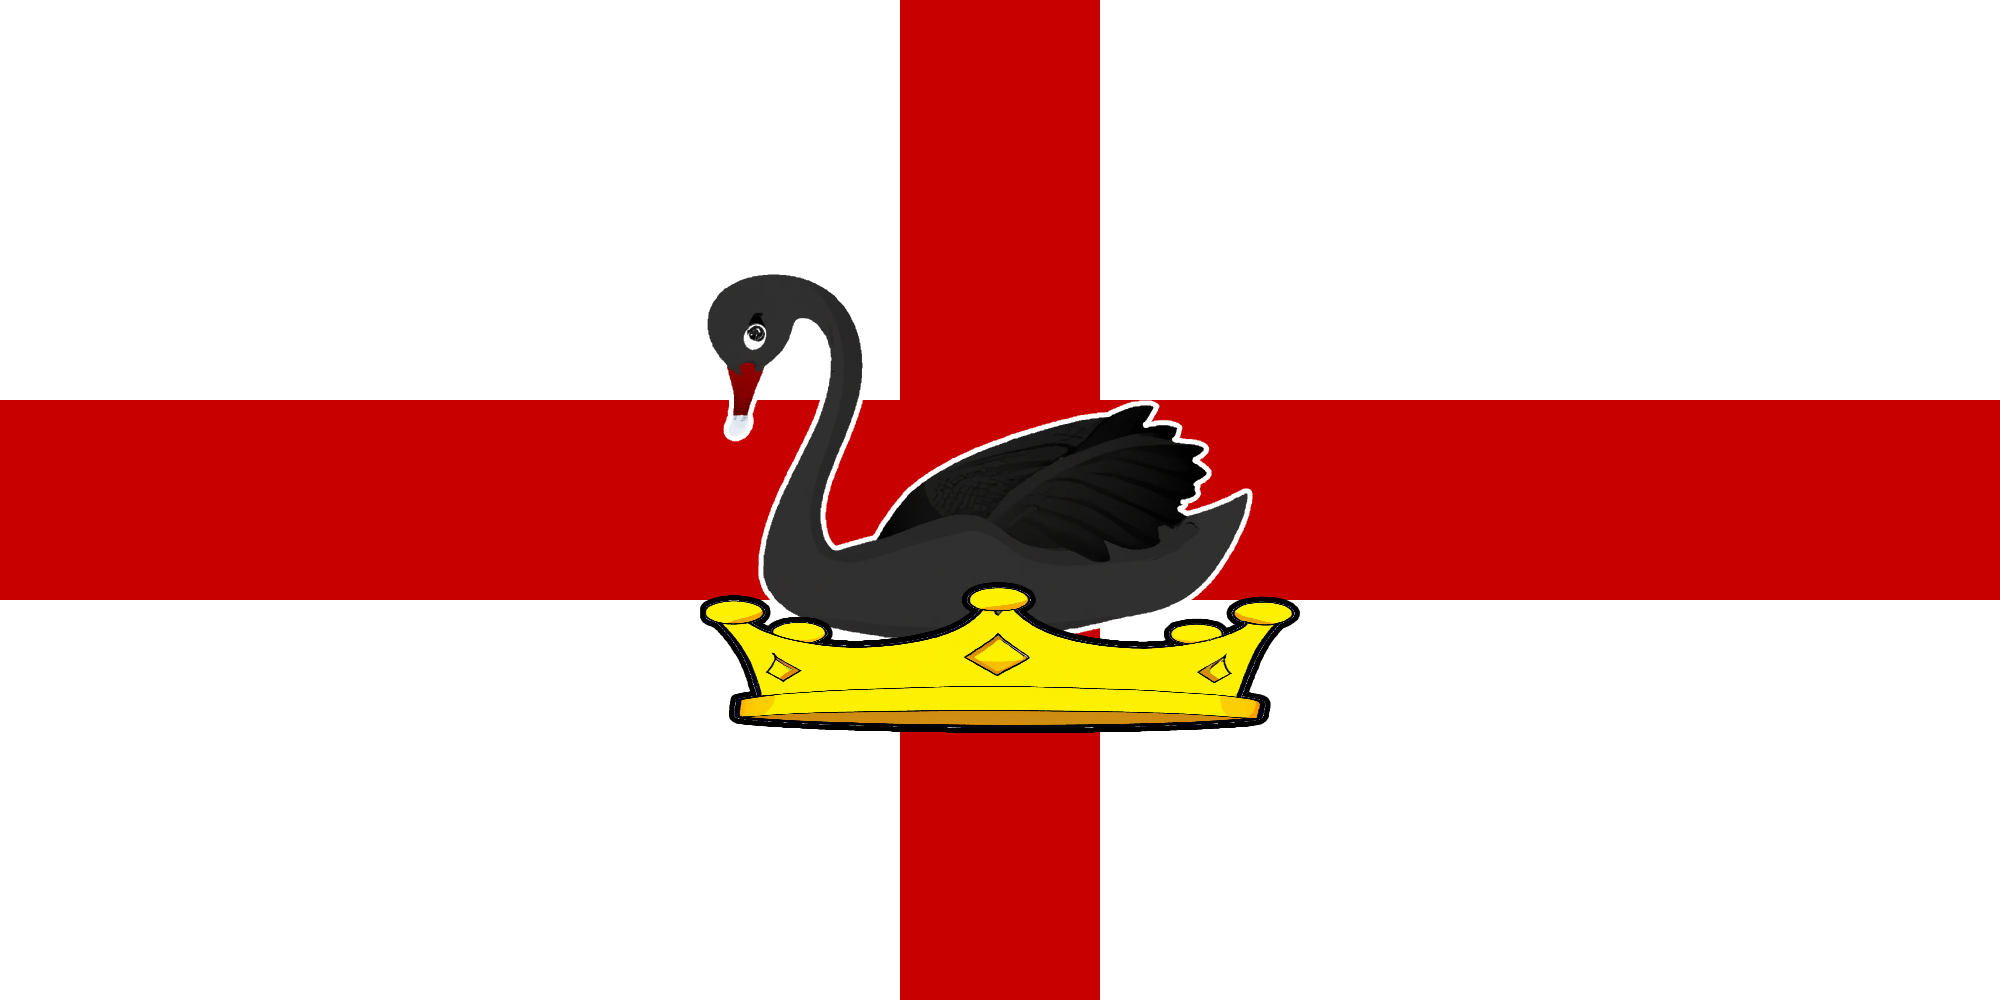 The redesigned Perth flag